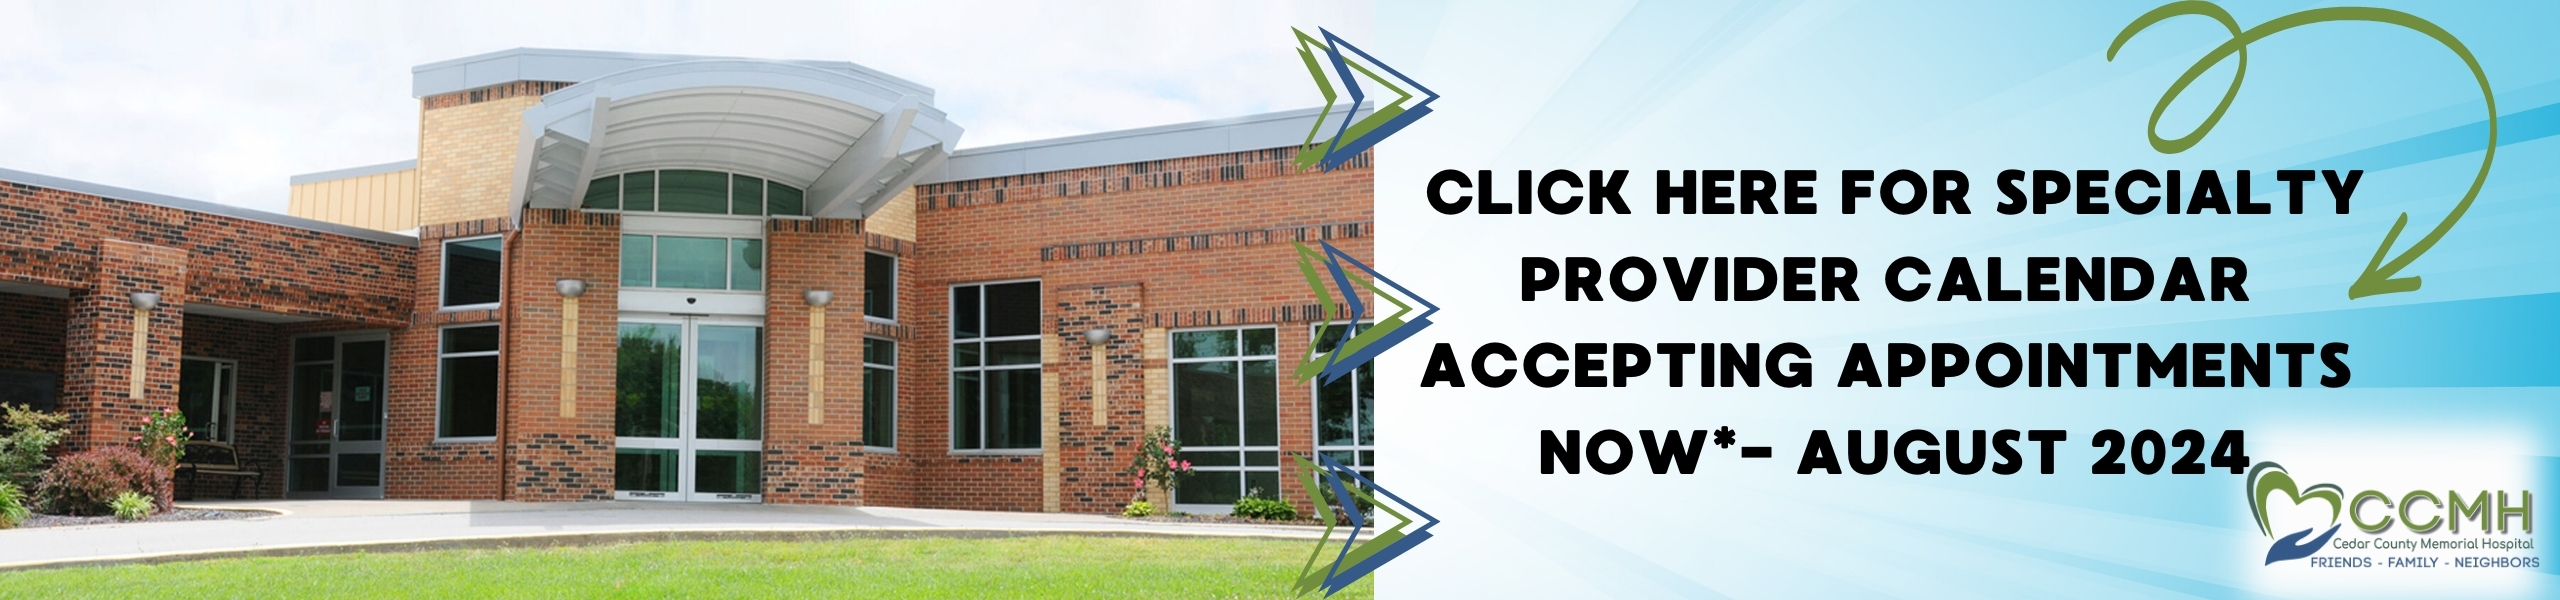 Click Here for Specialty 
PROVIDER CALENDAR NOW- AUGUST 2024
Accepting Appointments 

Cedar County Medical Hospital